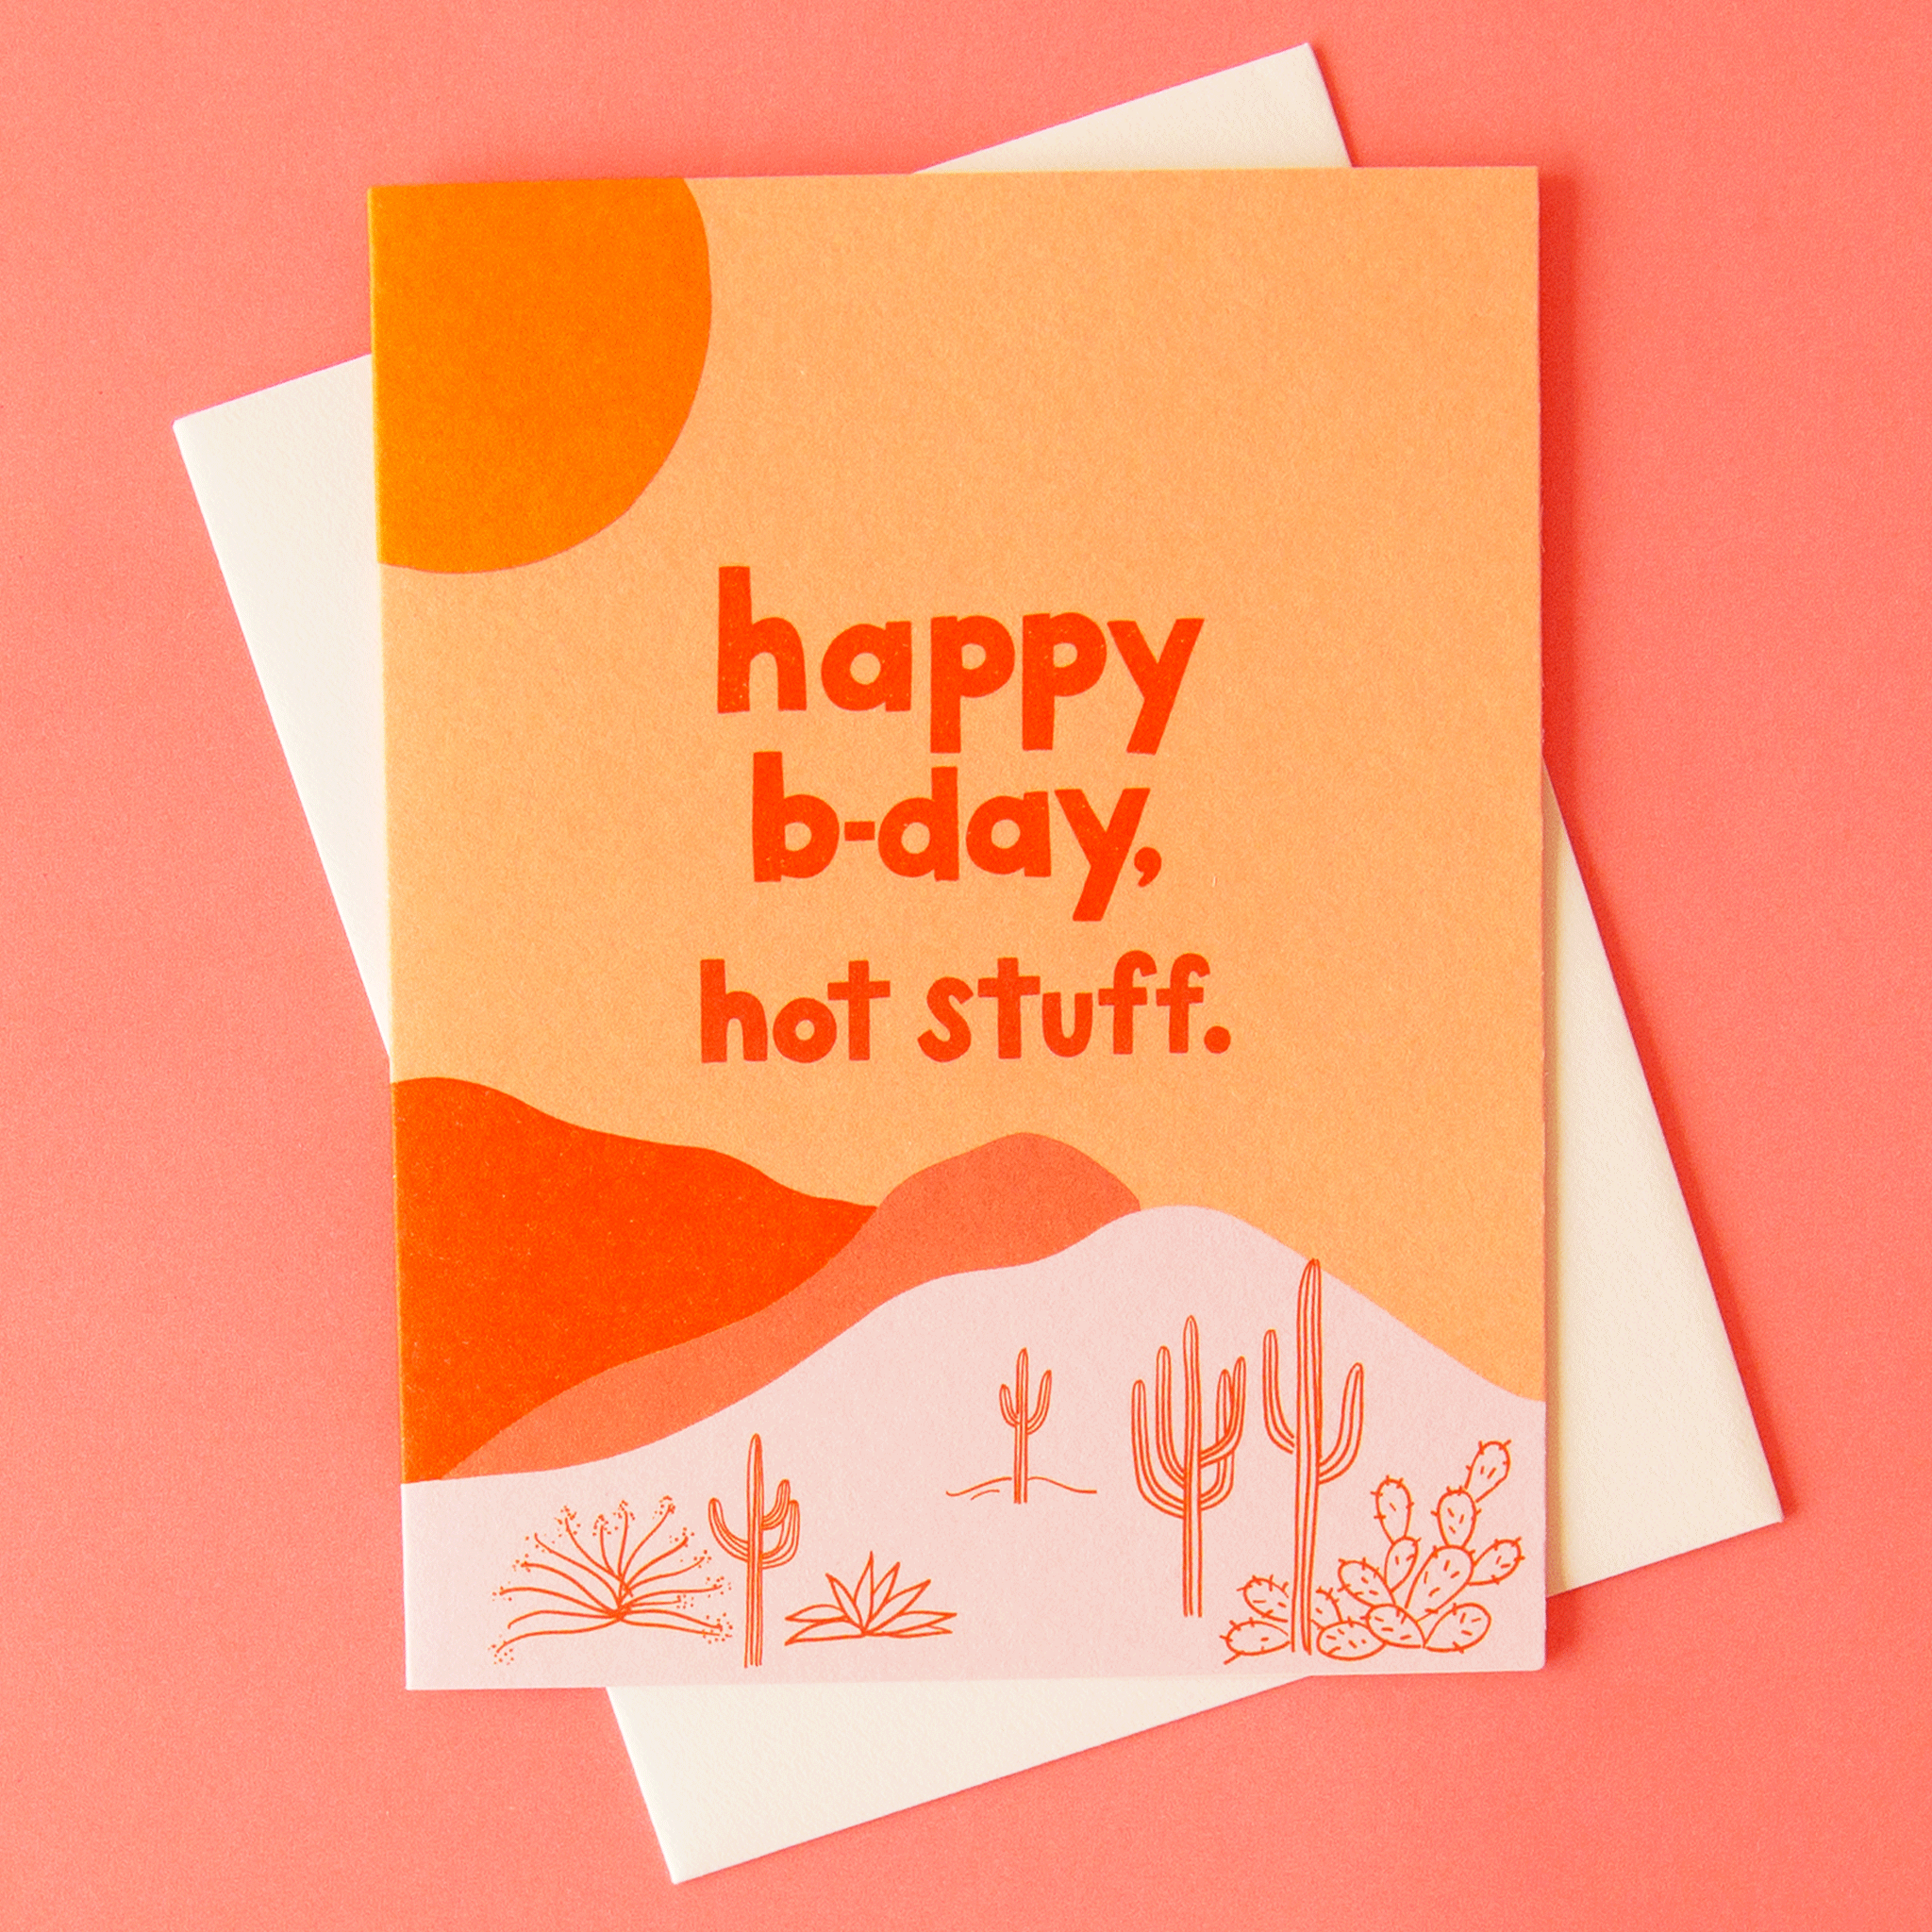 A salmon pink greeting card with a desert scape graphic featuring cactus and aloe illustrations along with a red and pink mountain range and a mustard yellow sun in the top left corner. The text on the front reads, "happy b-day hot stuff." in red font.